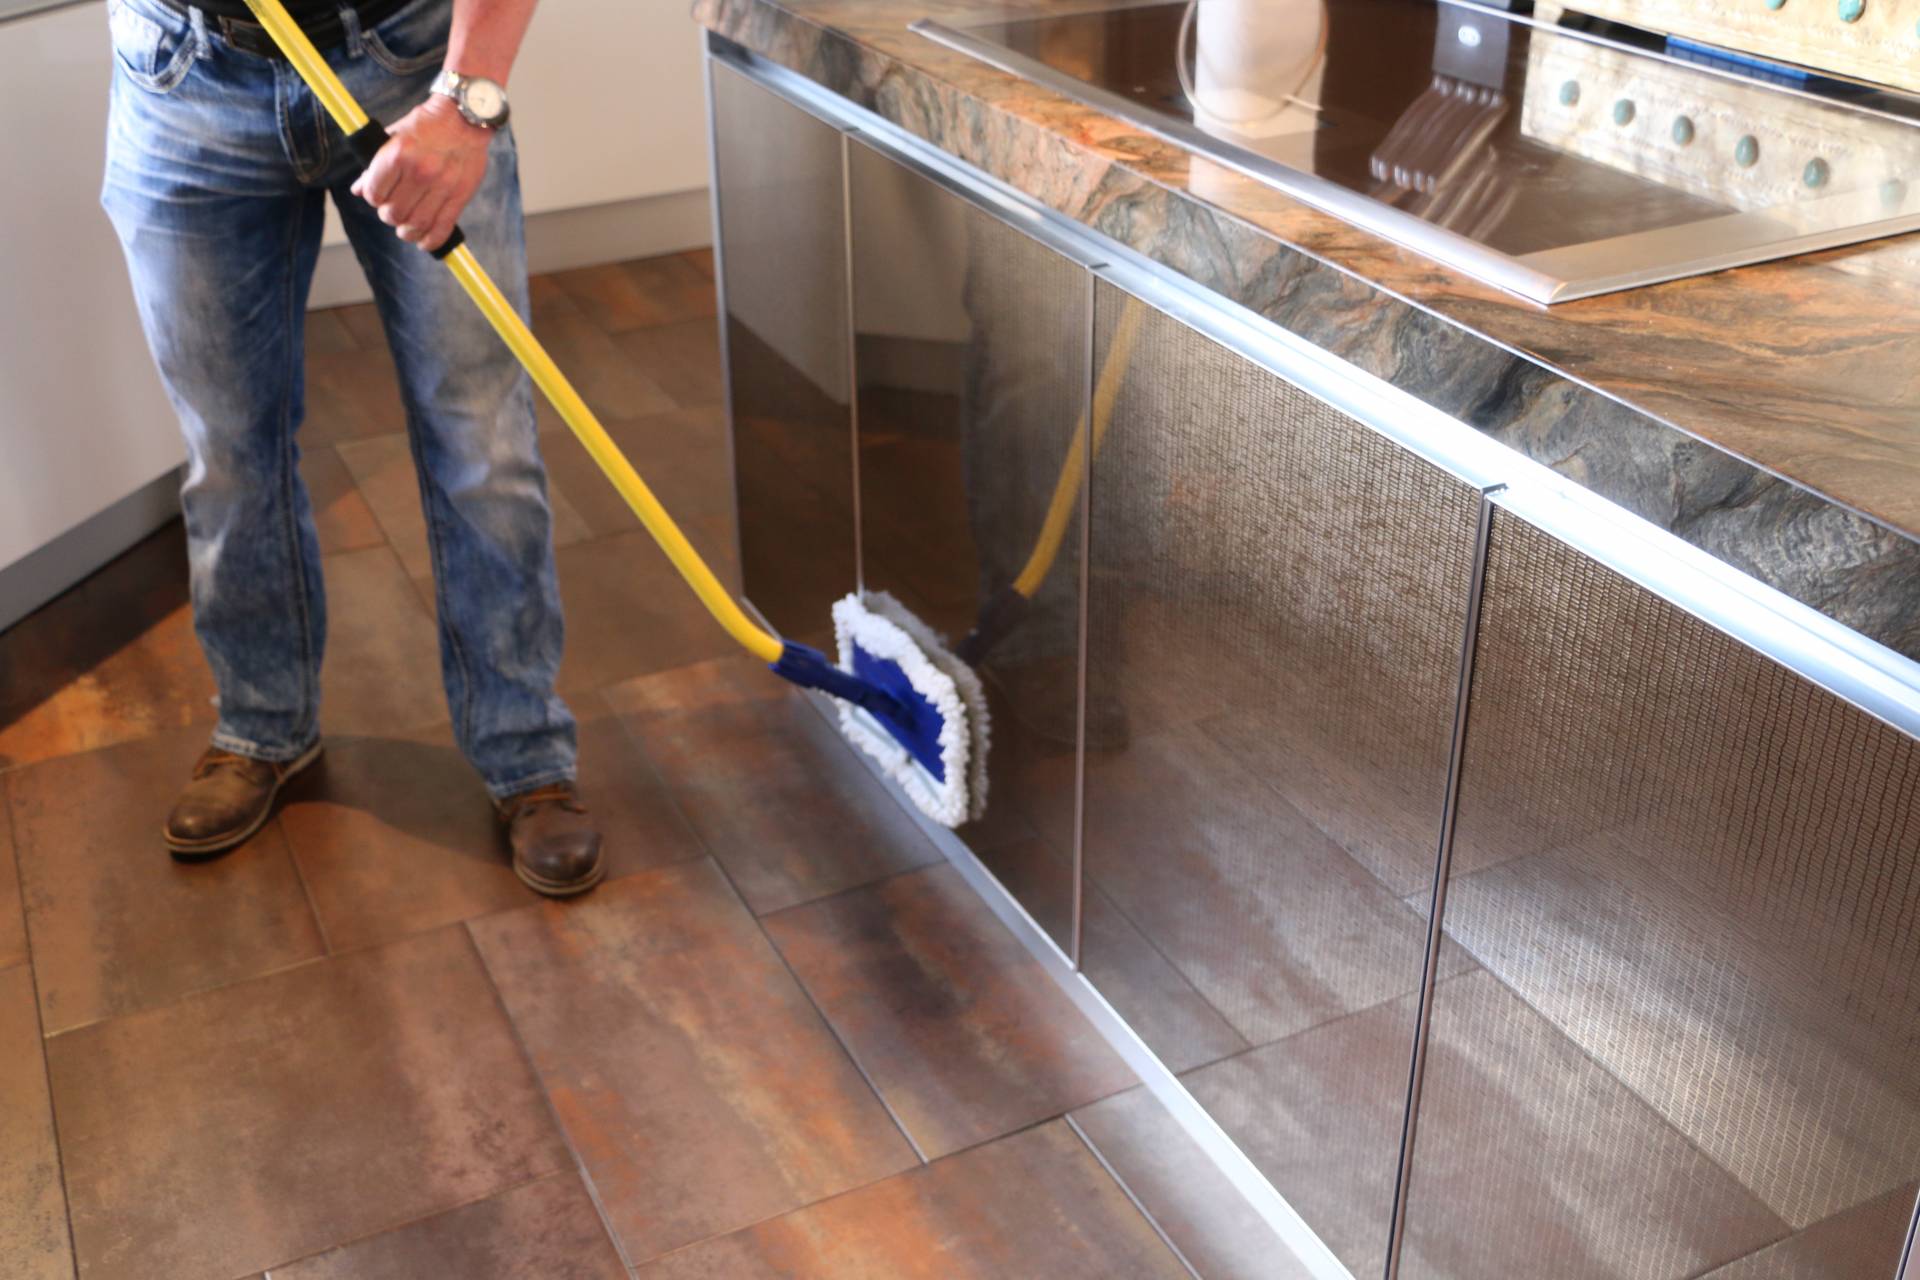 A person uses The Simple Scrub Original cleaning wand to wipe down stainless steel cabinetry in a modern kitchen.